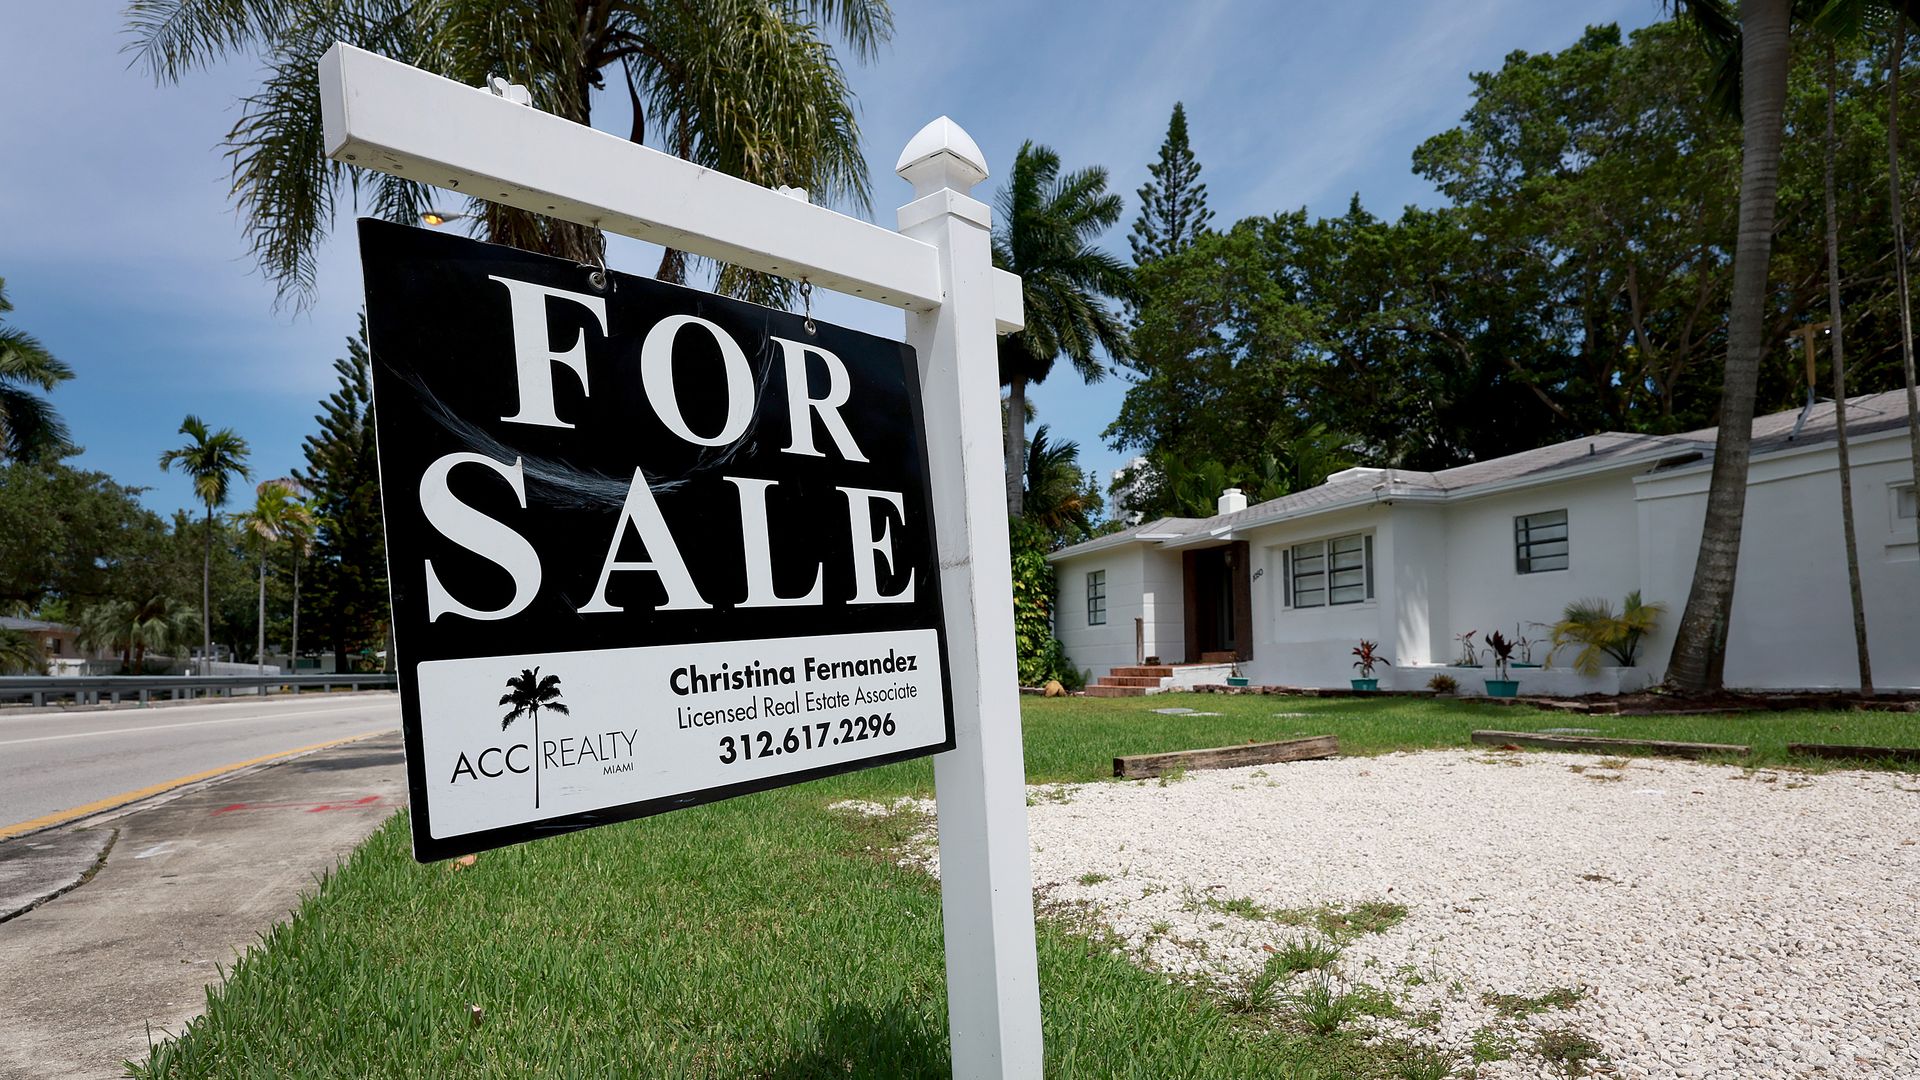 A 'for sale' sign hangs in front of a home on June 21, 2022 in Miami, Florida.